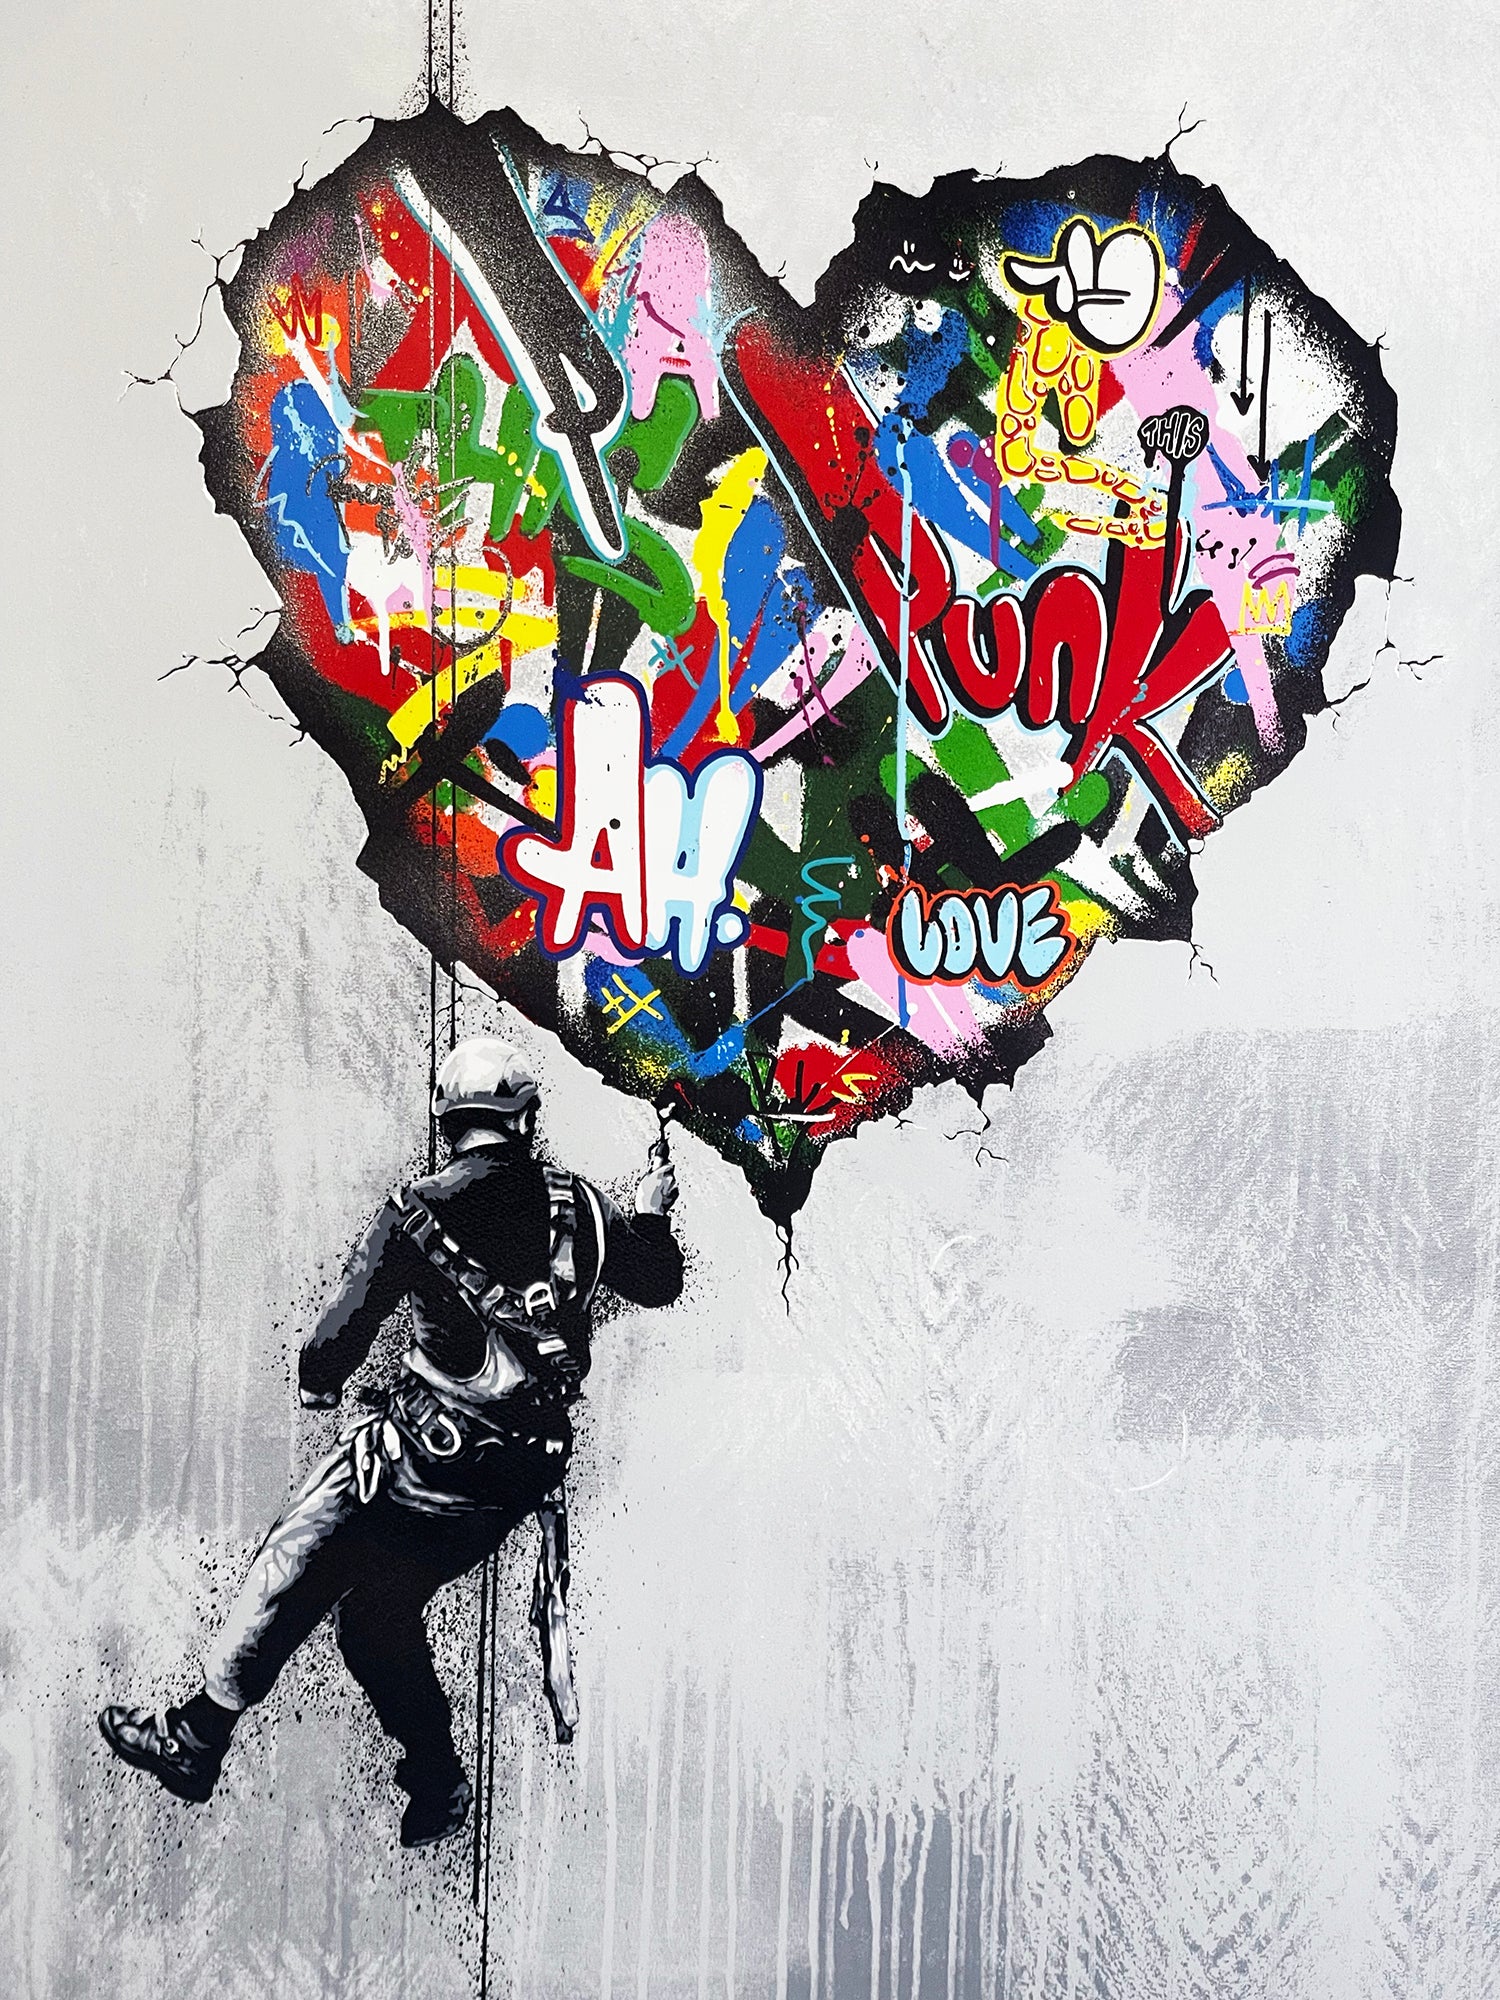 MARTIN WHATSON 'Cracked' 30 Color Embossed Screen Print